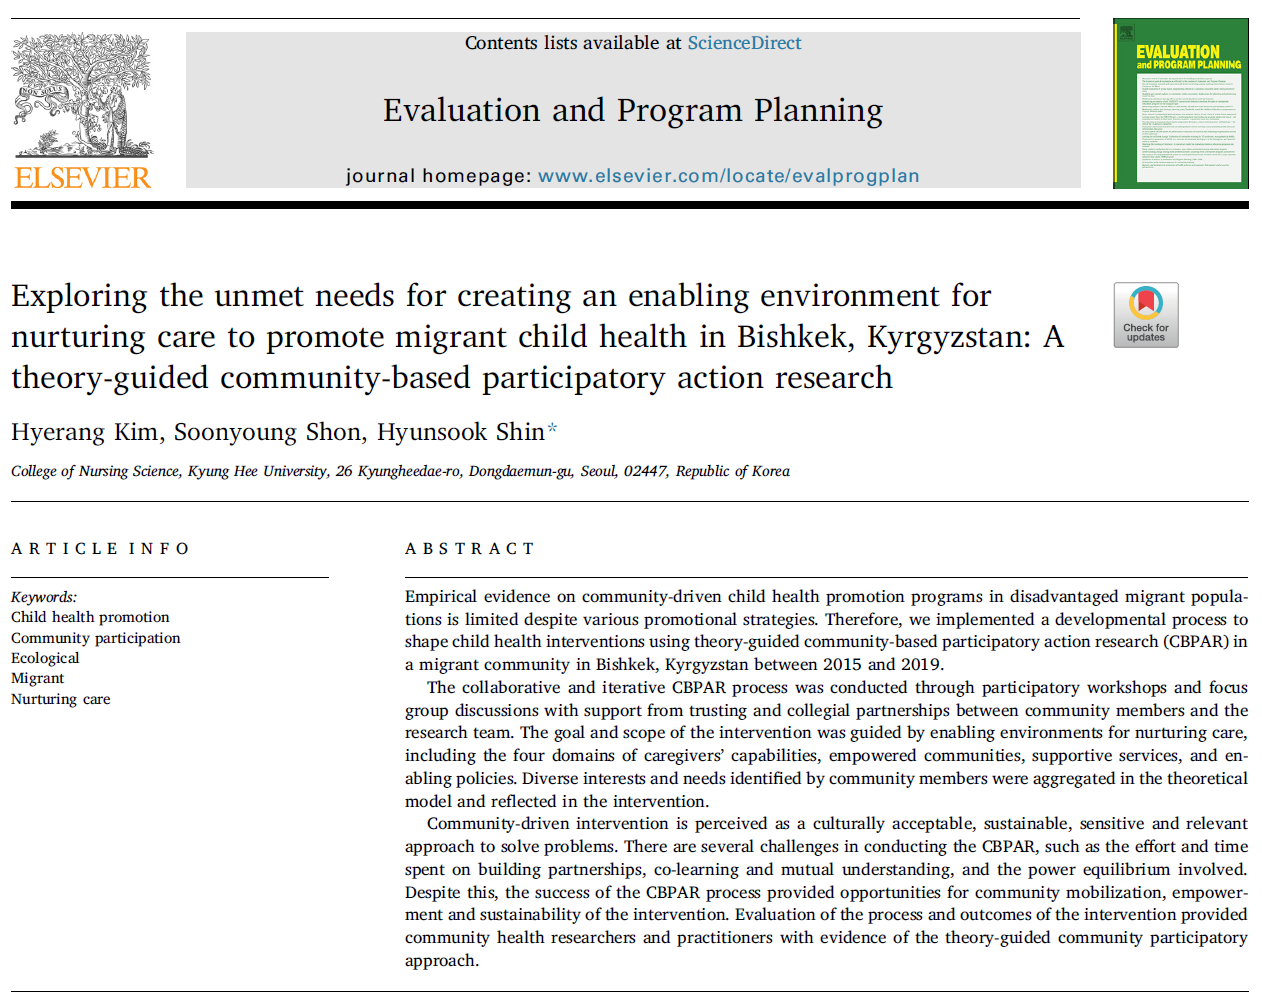 [Researdh Article] Exploring the unmet needs for creating an enabling environment for nurturing care to promote migrant child health in Bishkek, Kyrgyzstan: A theory-guided community-ba<x>sed participatory action research